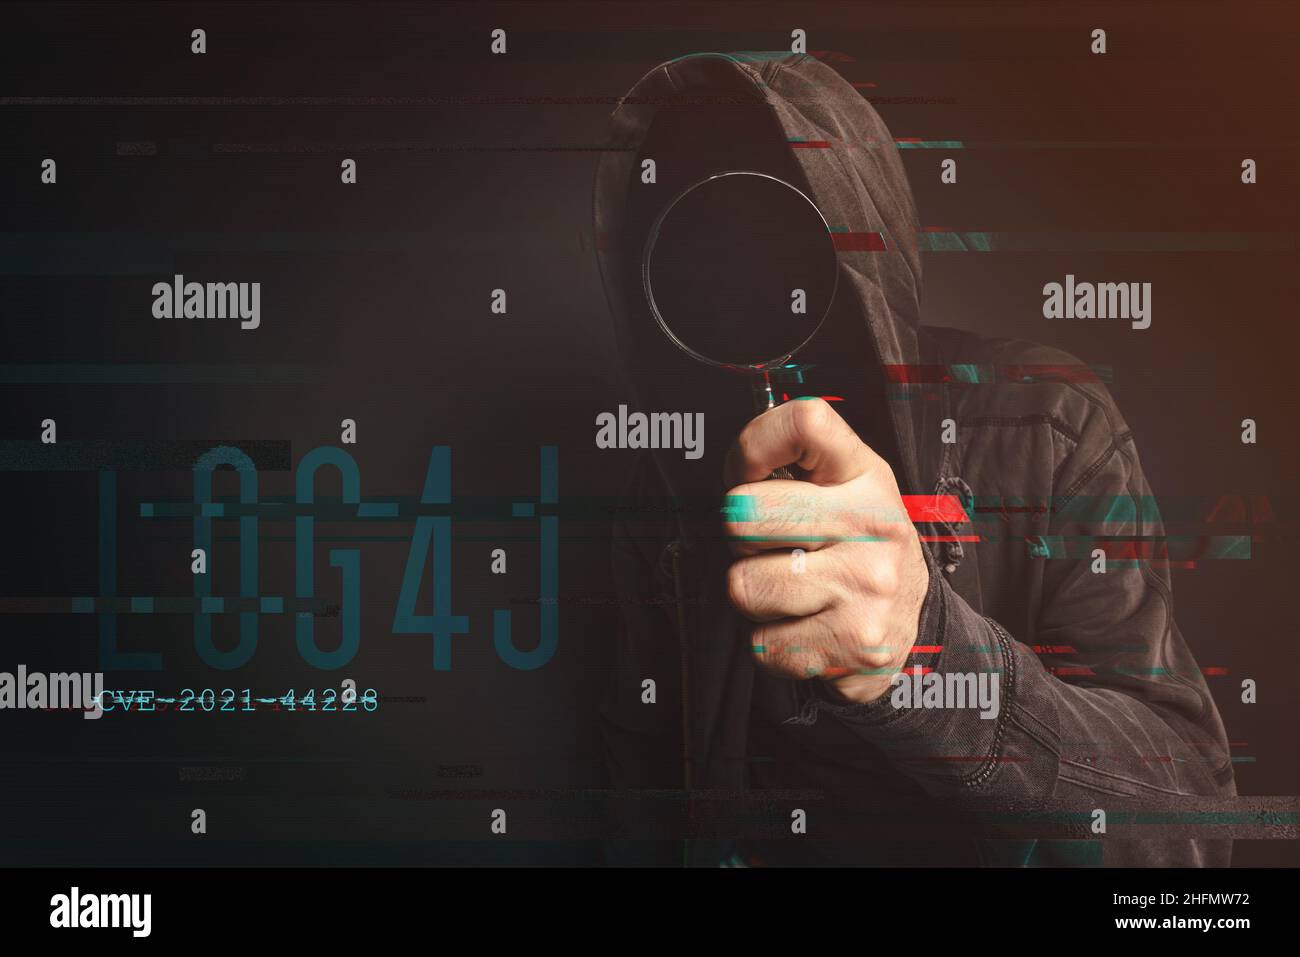 Hooded computer hacker in cybersecurity vulnerability Log4J concept with digital glitch effect Stock Photo